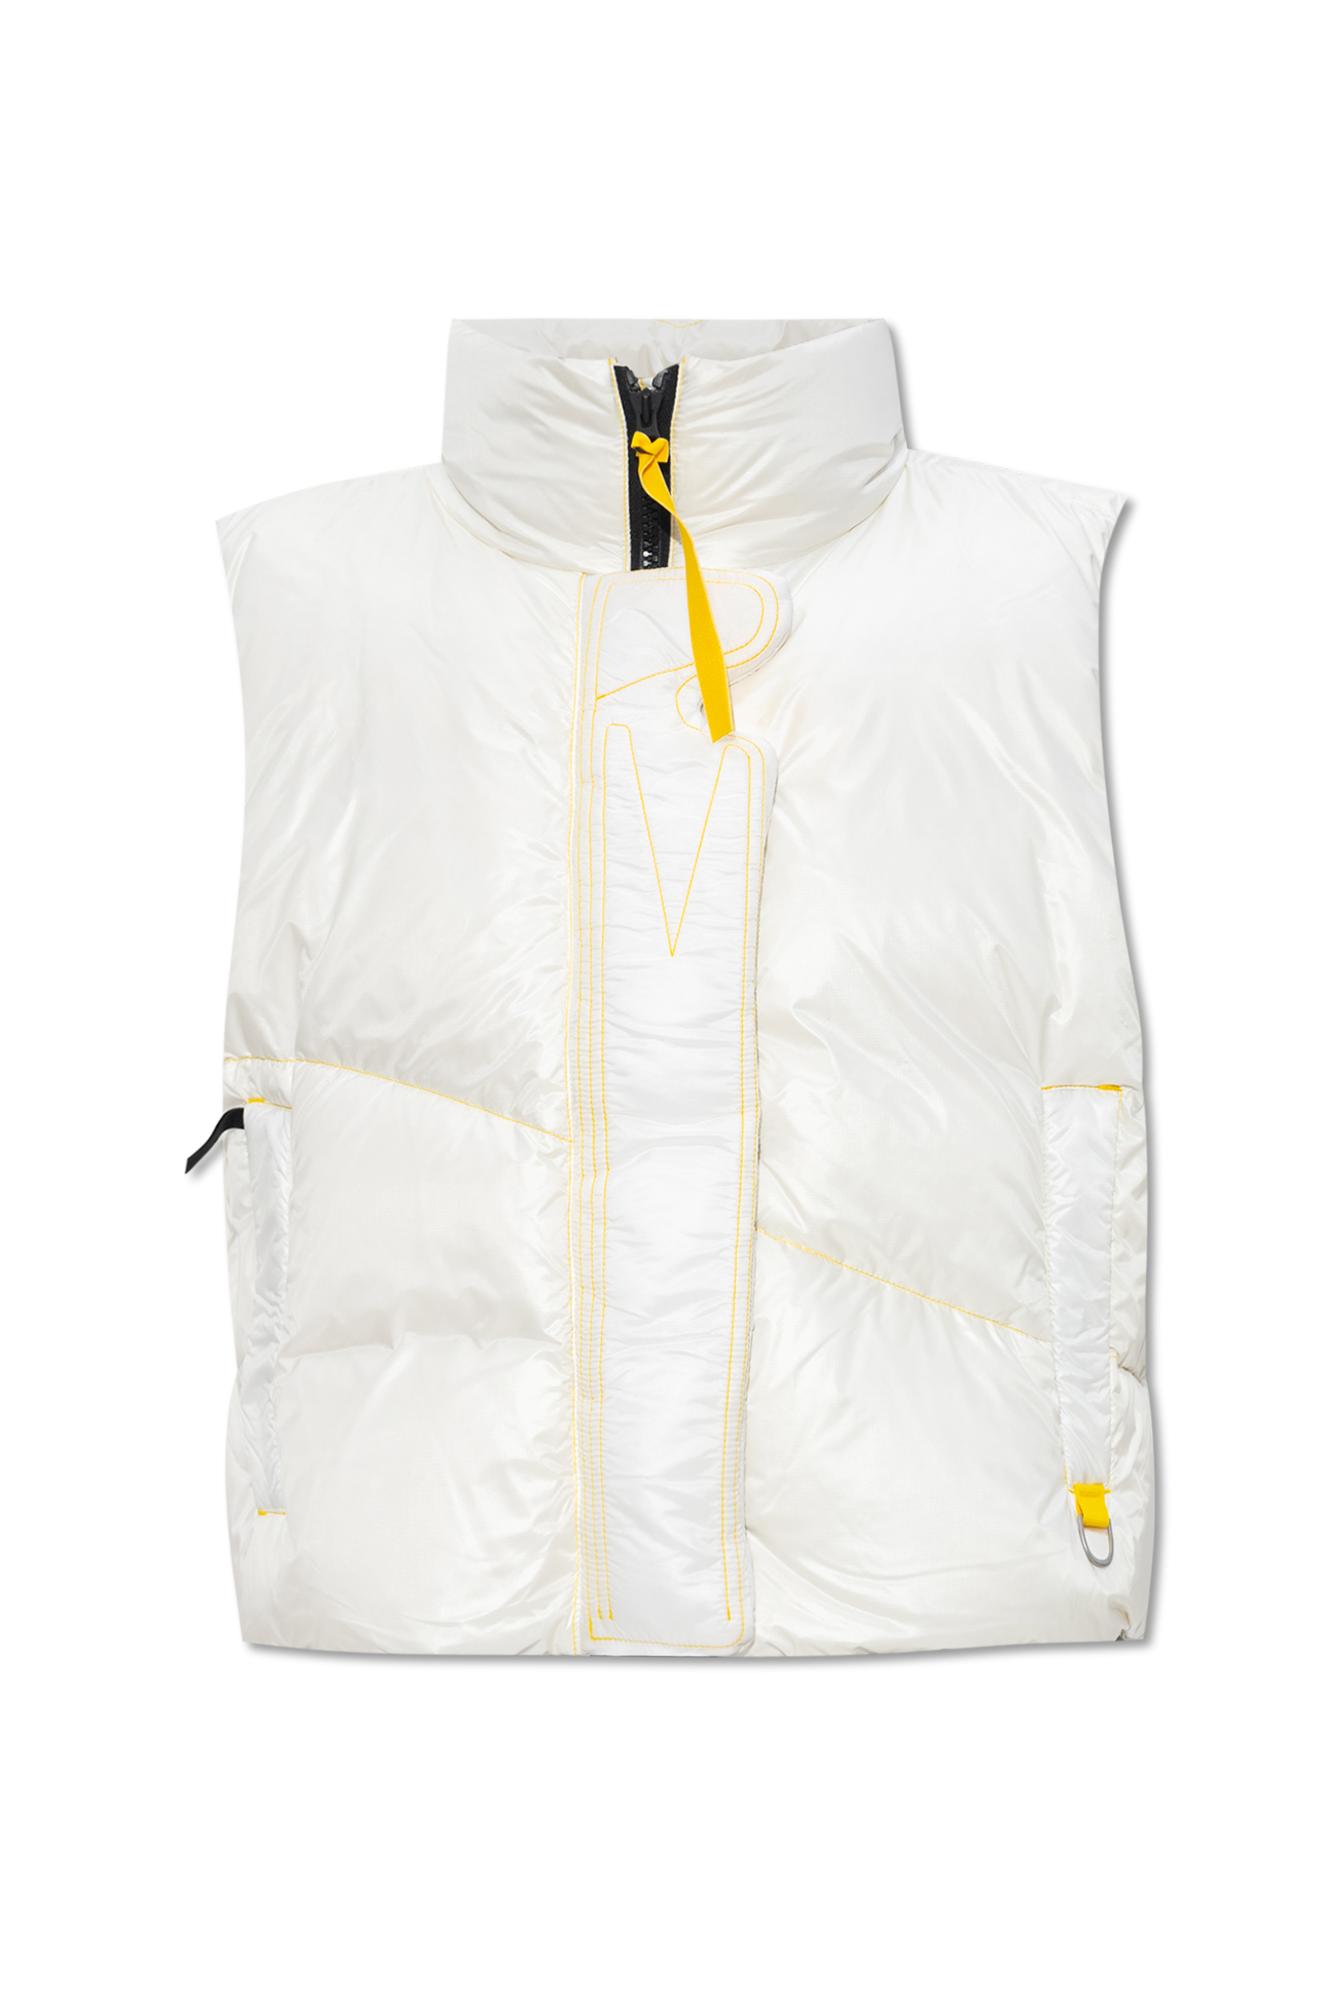 Canada Goose X Pyer Moss in White